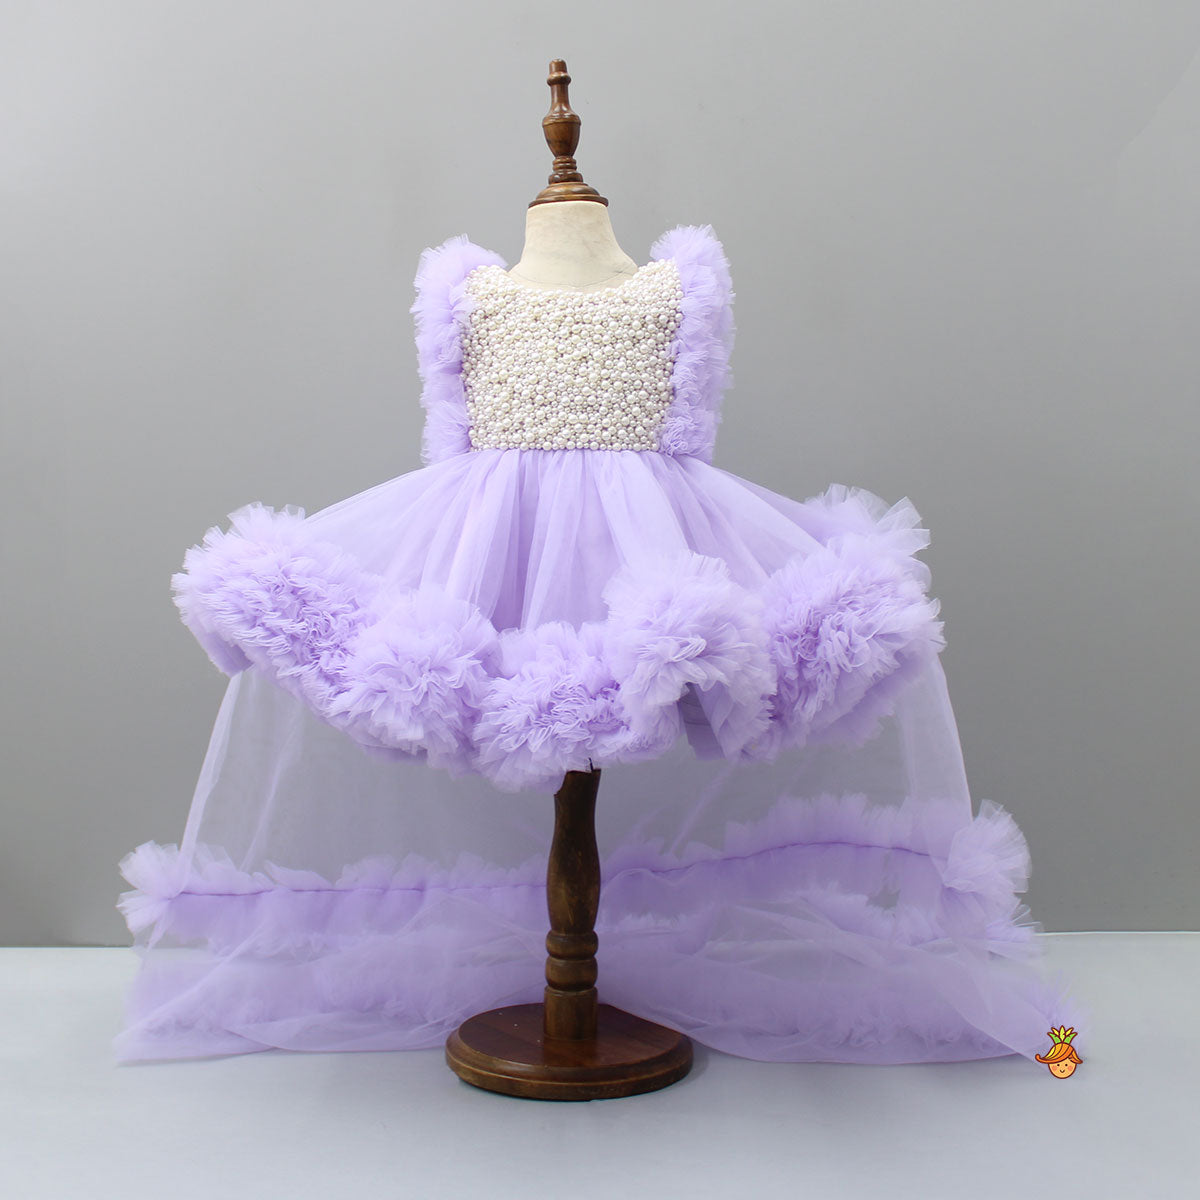 Pre Order: Embroidered Yoke Ruffle Hem Lavender Dress With Detachable Trail And Matching Head Band